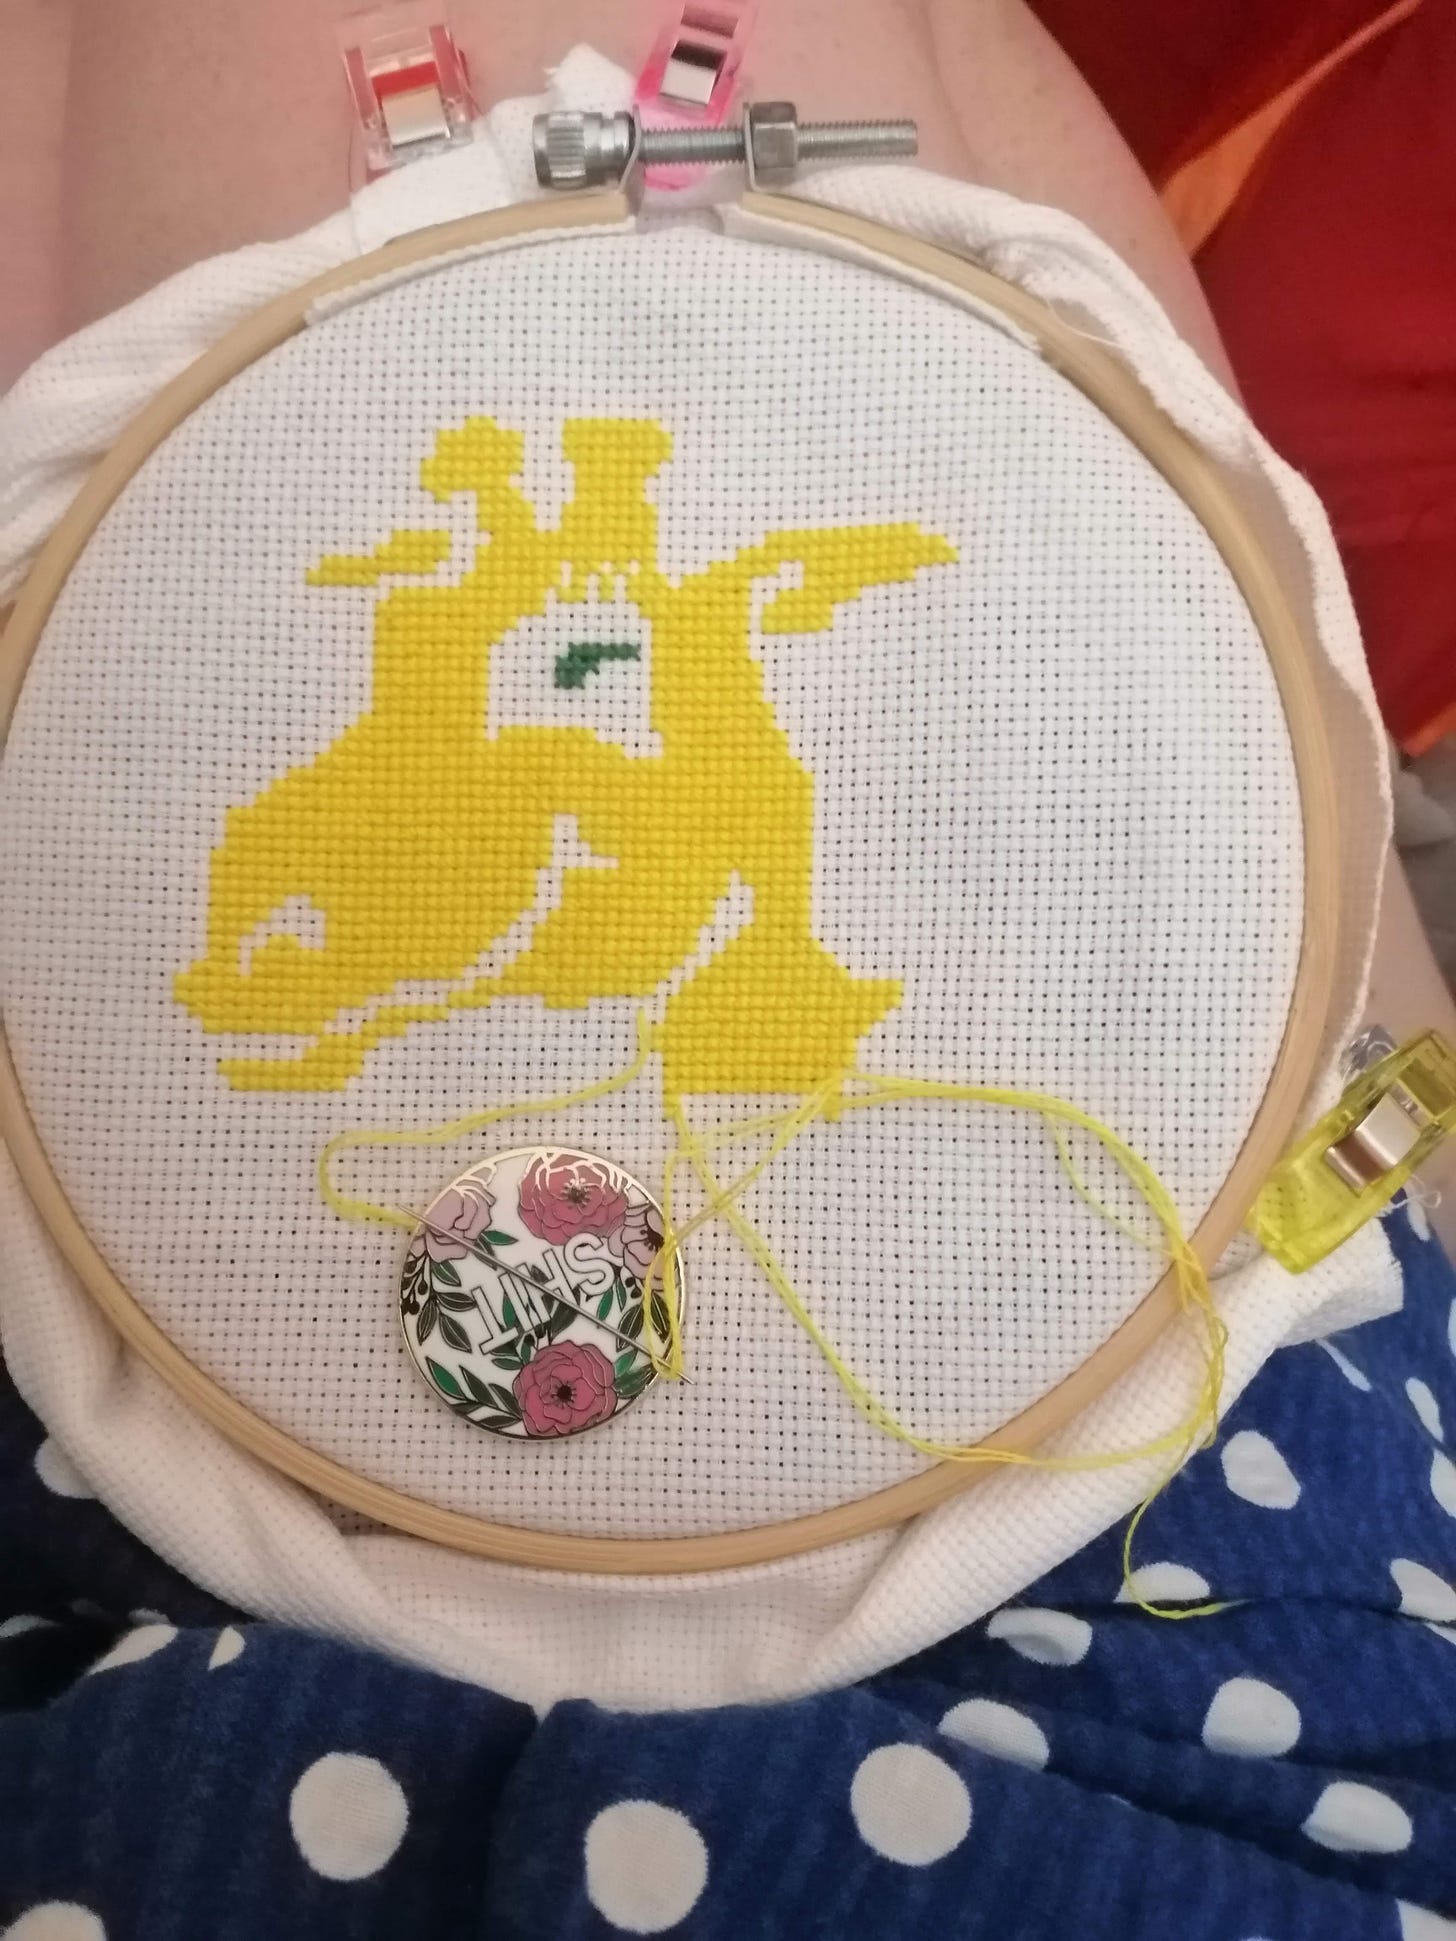 Work in progress cross-stitch of just the yellow parts of a giraffe's head